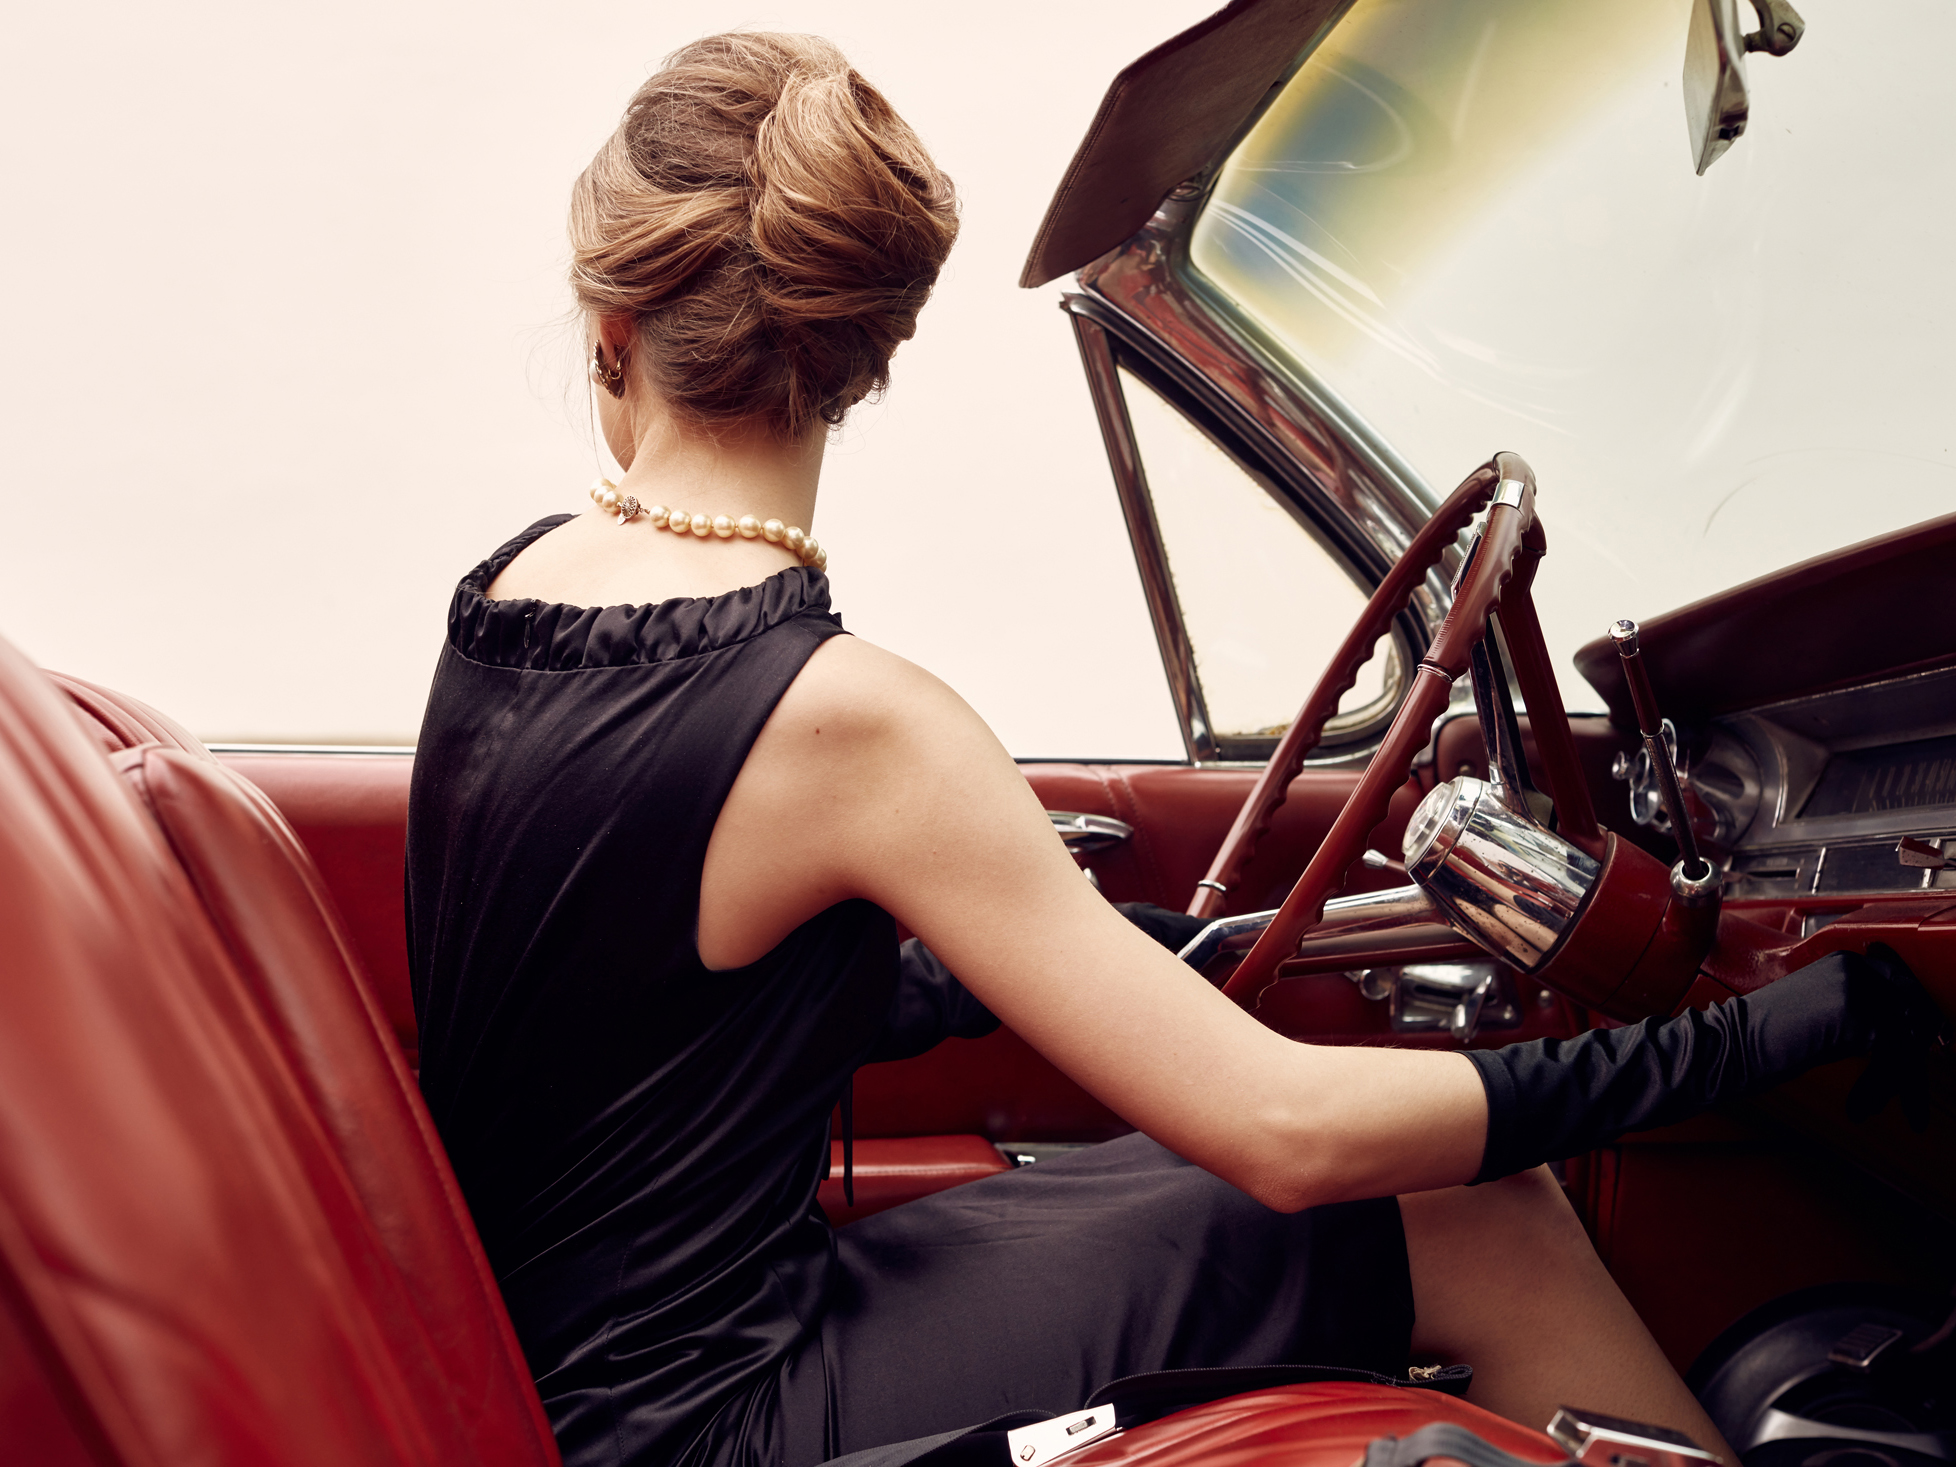 Fashion model sitting in car photographed by advertising photographer Kate Benson.